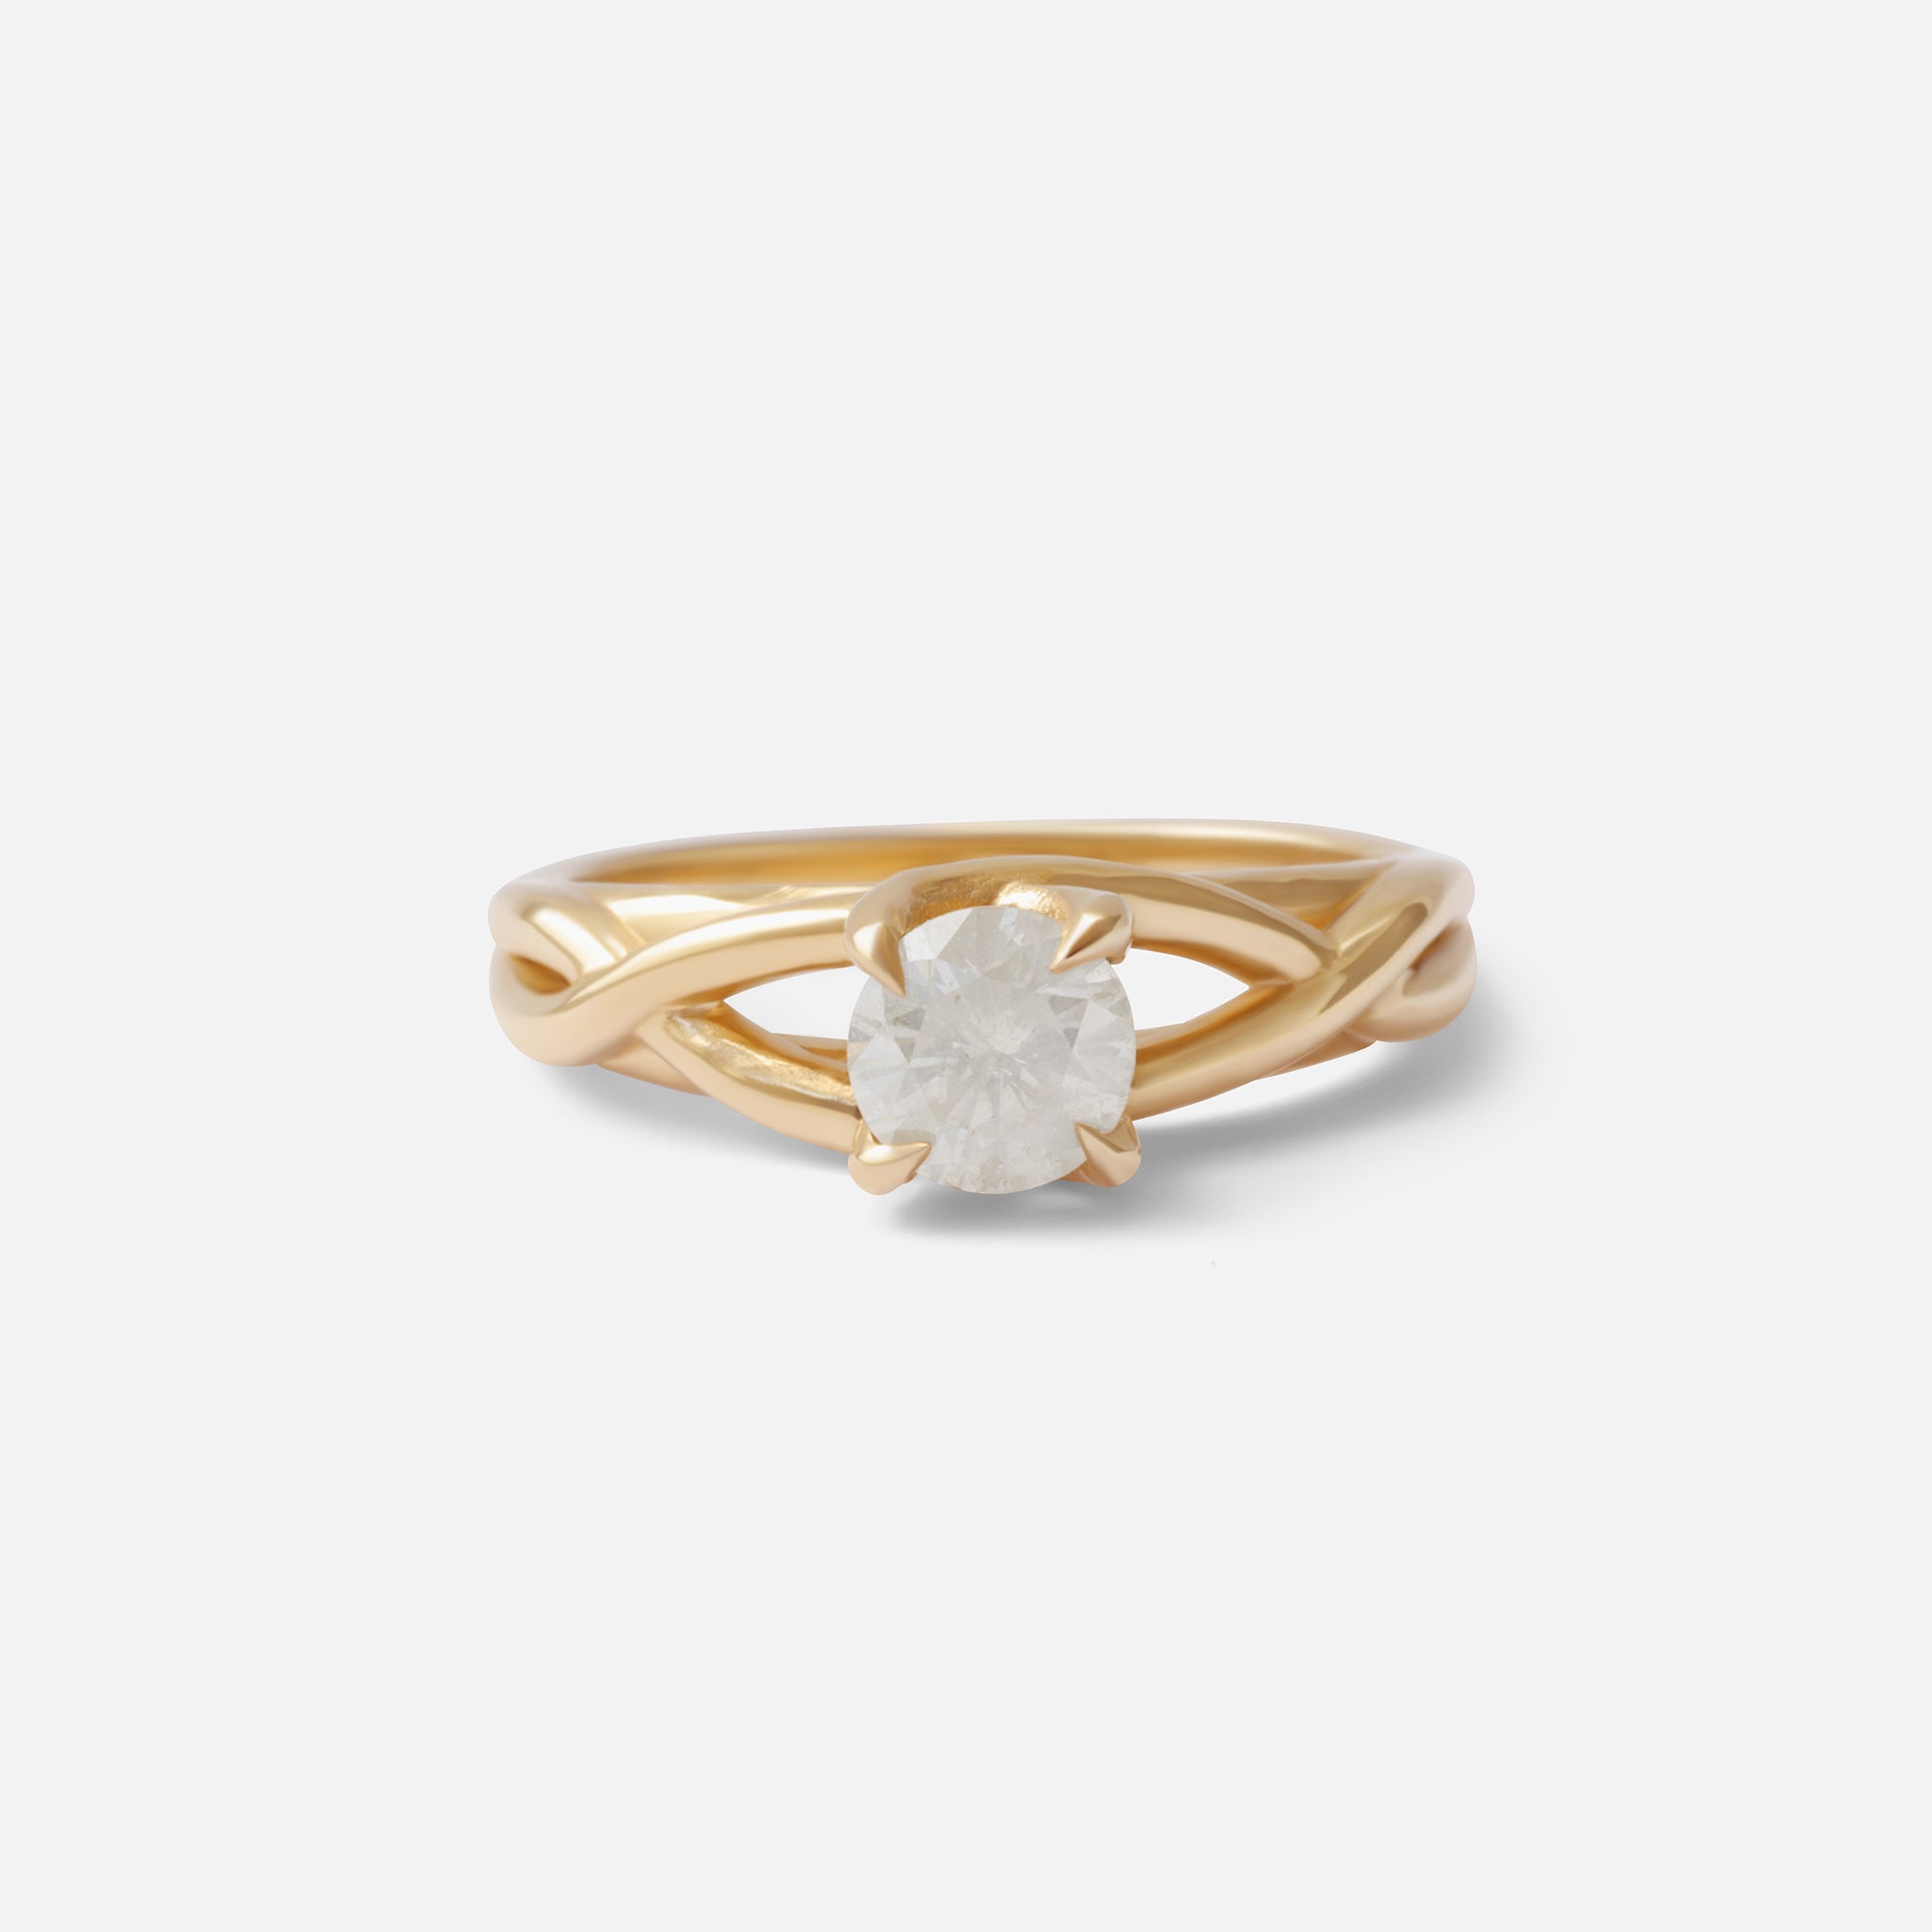 Twist Solitaire Ring By Kestrel Dillon